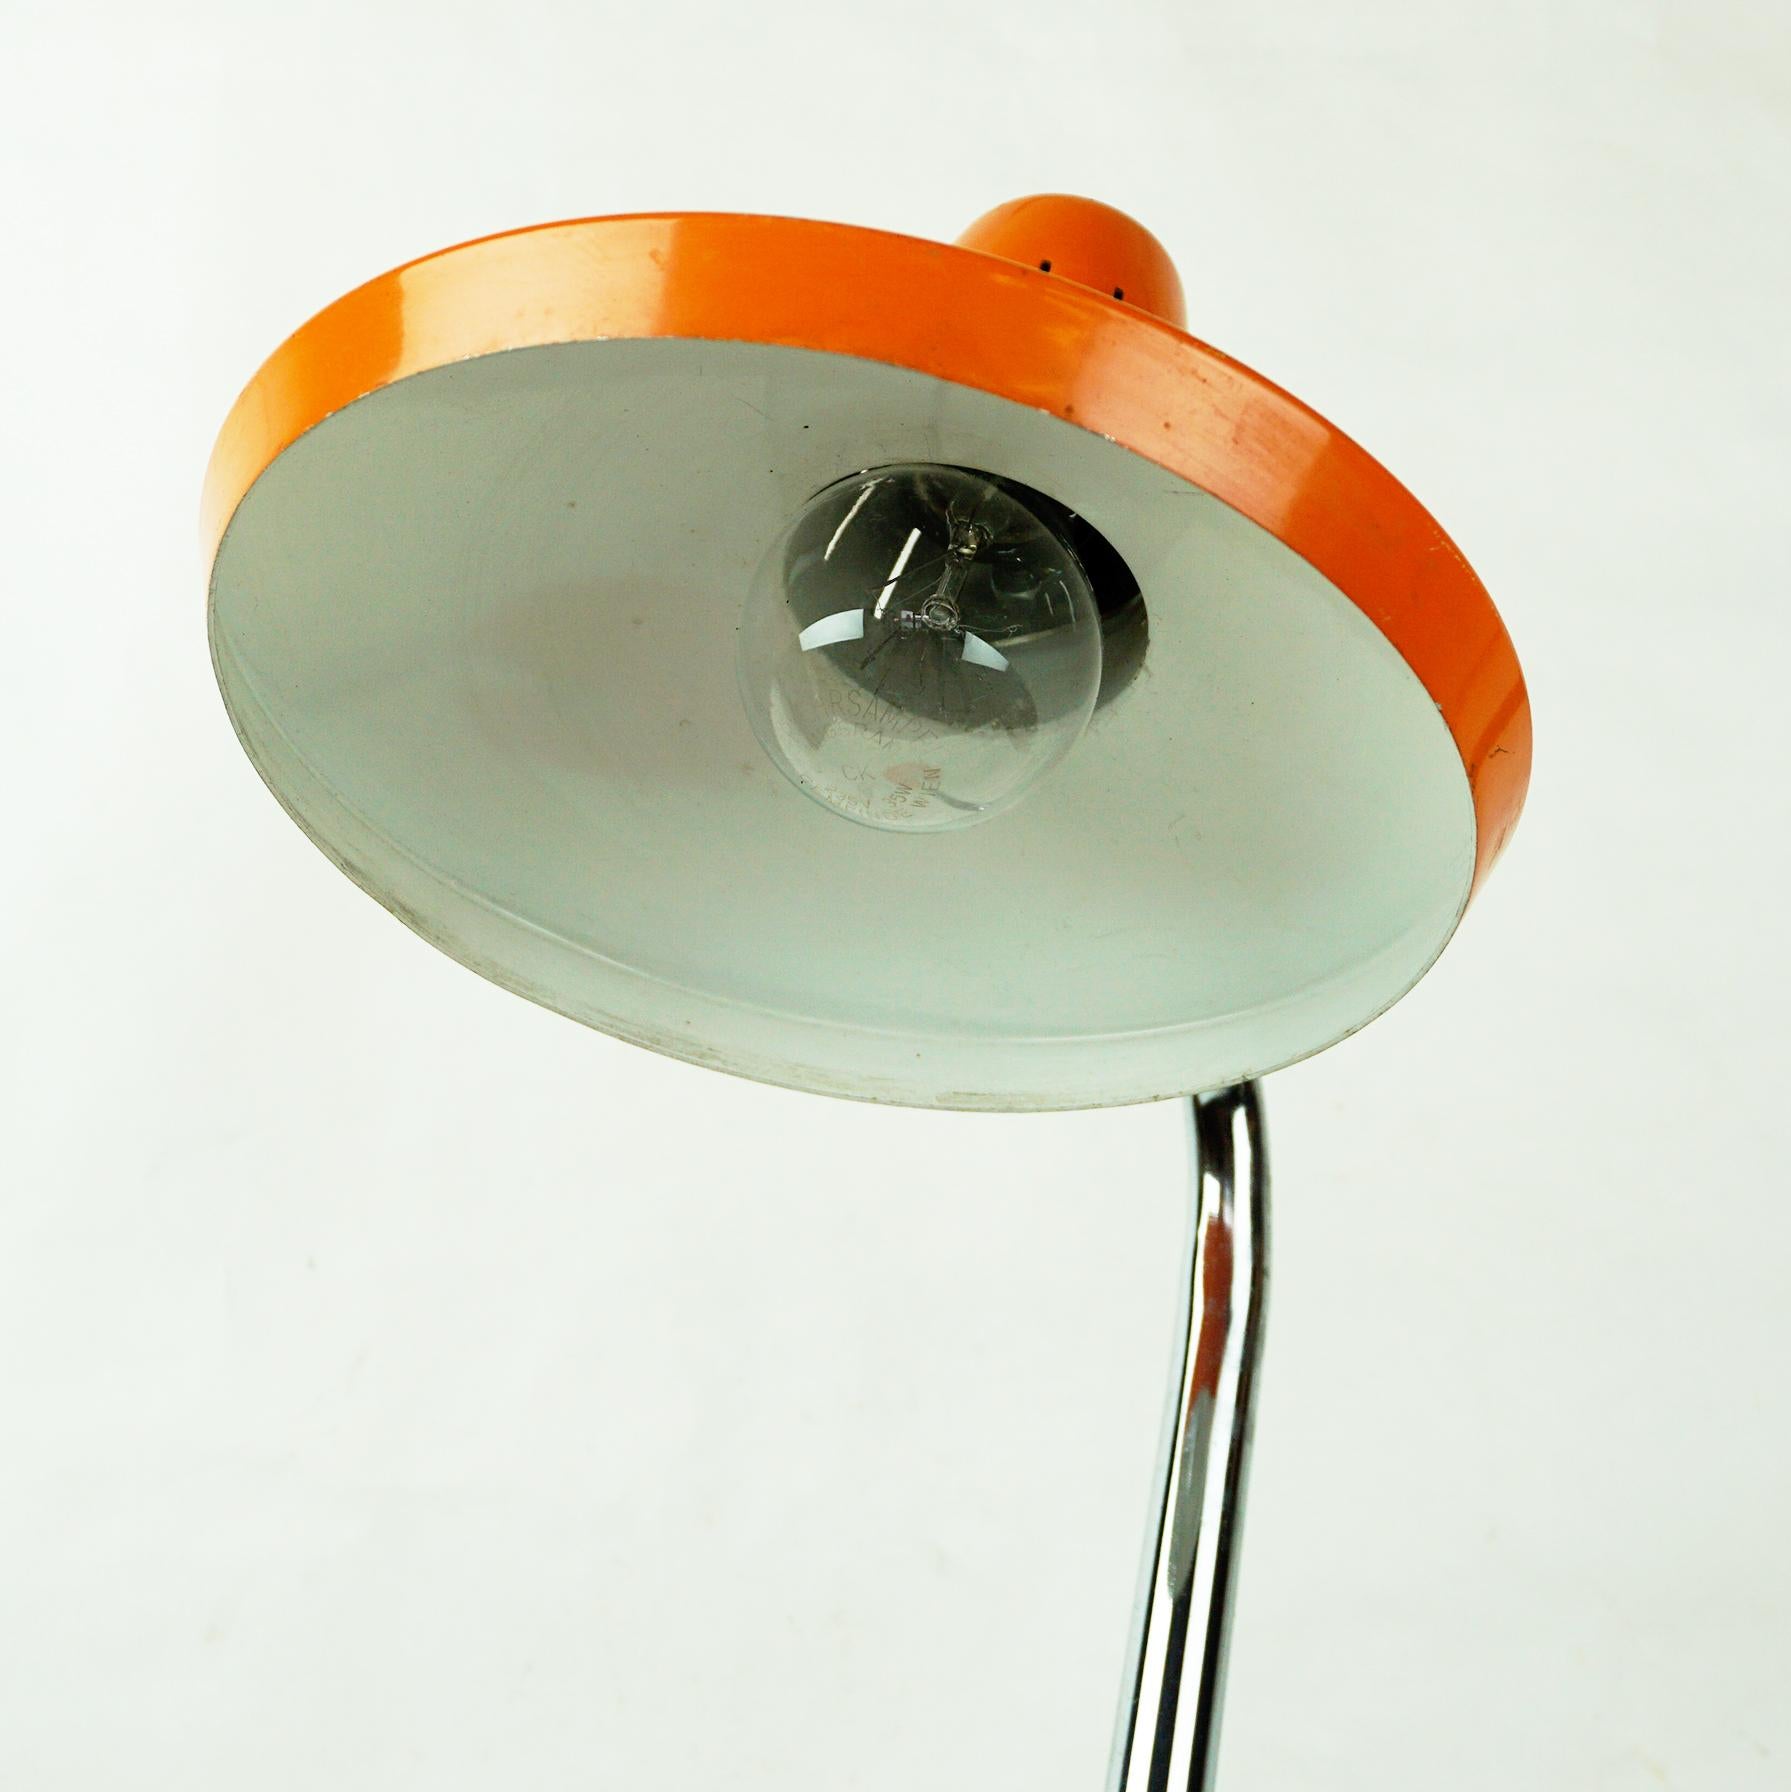 Lacquered Orange Midcentury Adjustable Desk or Table Lamp by Fase Madrid Spain